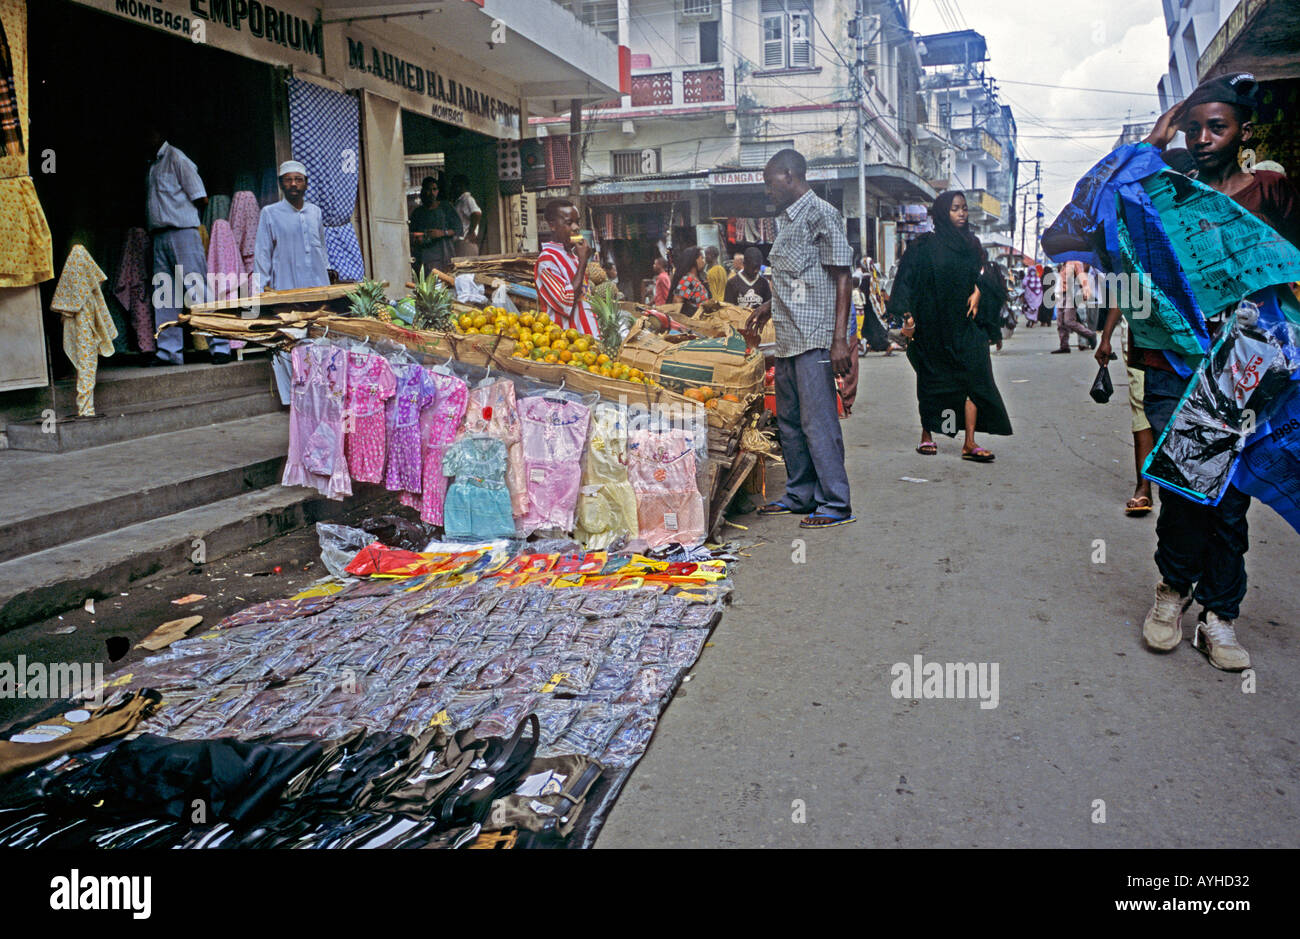 AFRICA KENYA MOMBASA Street scene in the market district of Mombasa with fruit cloth clothes all for sale Stock Photo